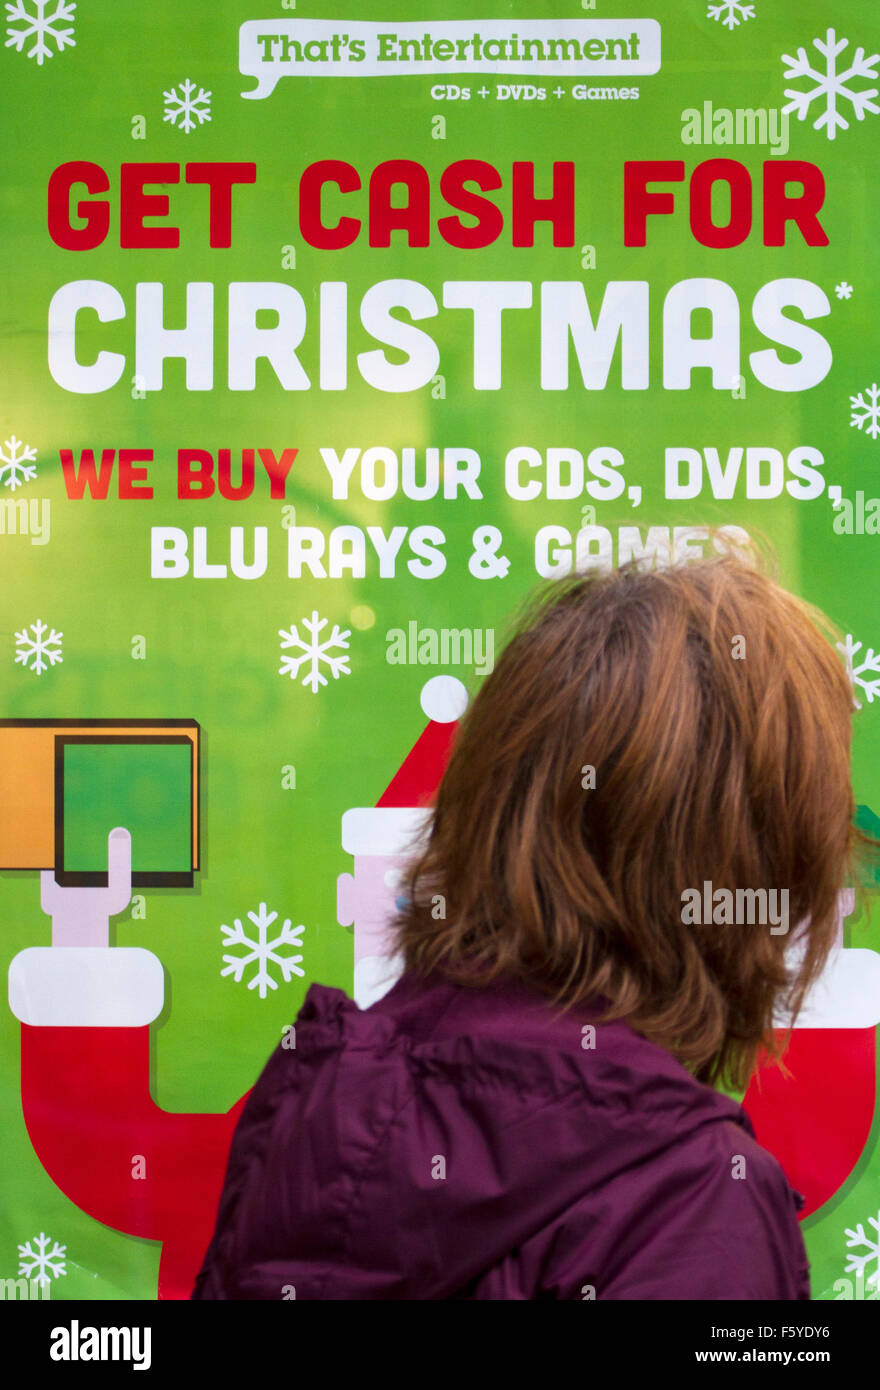 Get Cash for Christmas Poster 'That's Entertainment', Liverpool, Merseyside, UK Stock Photo